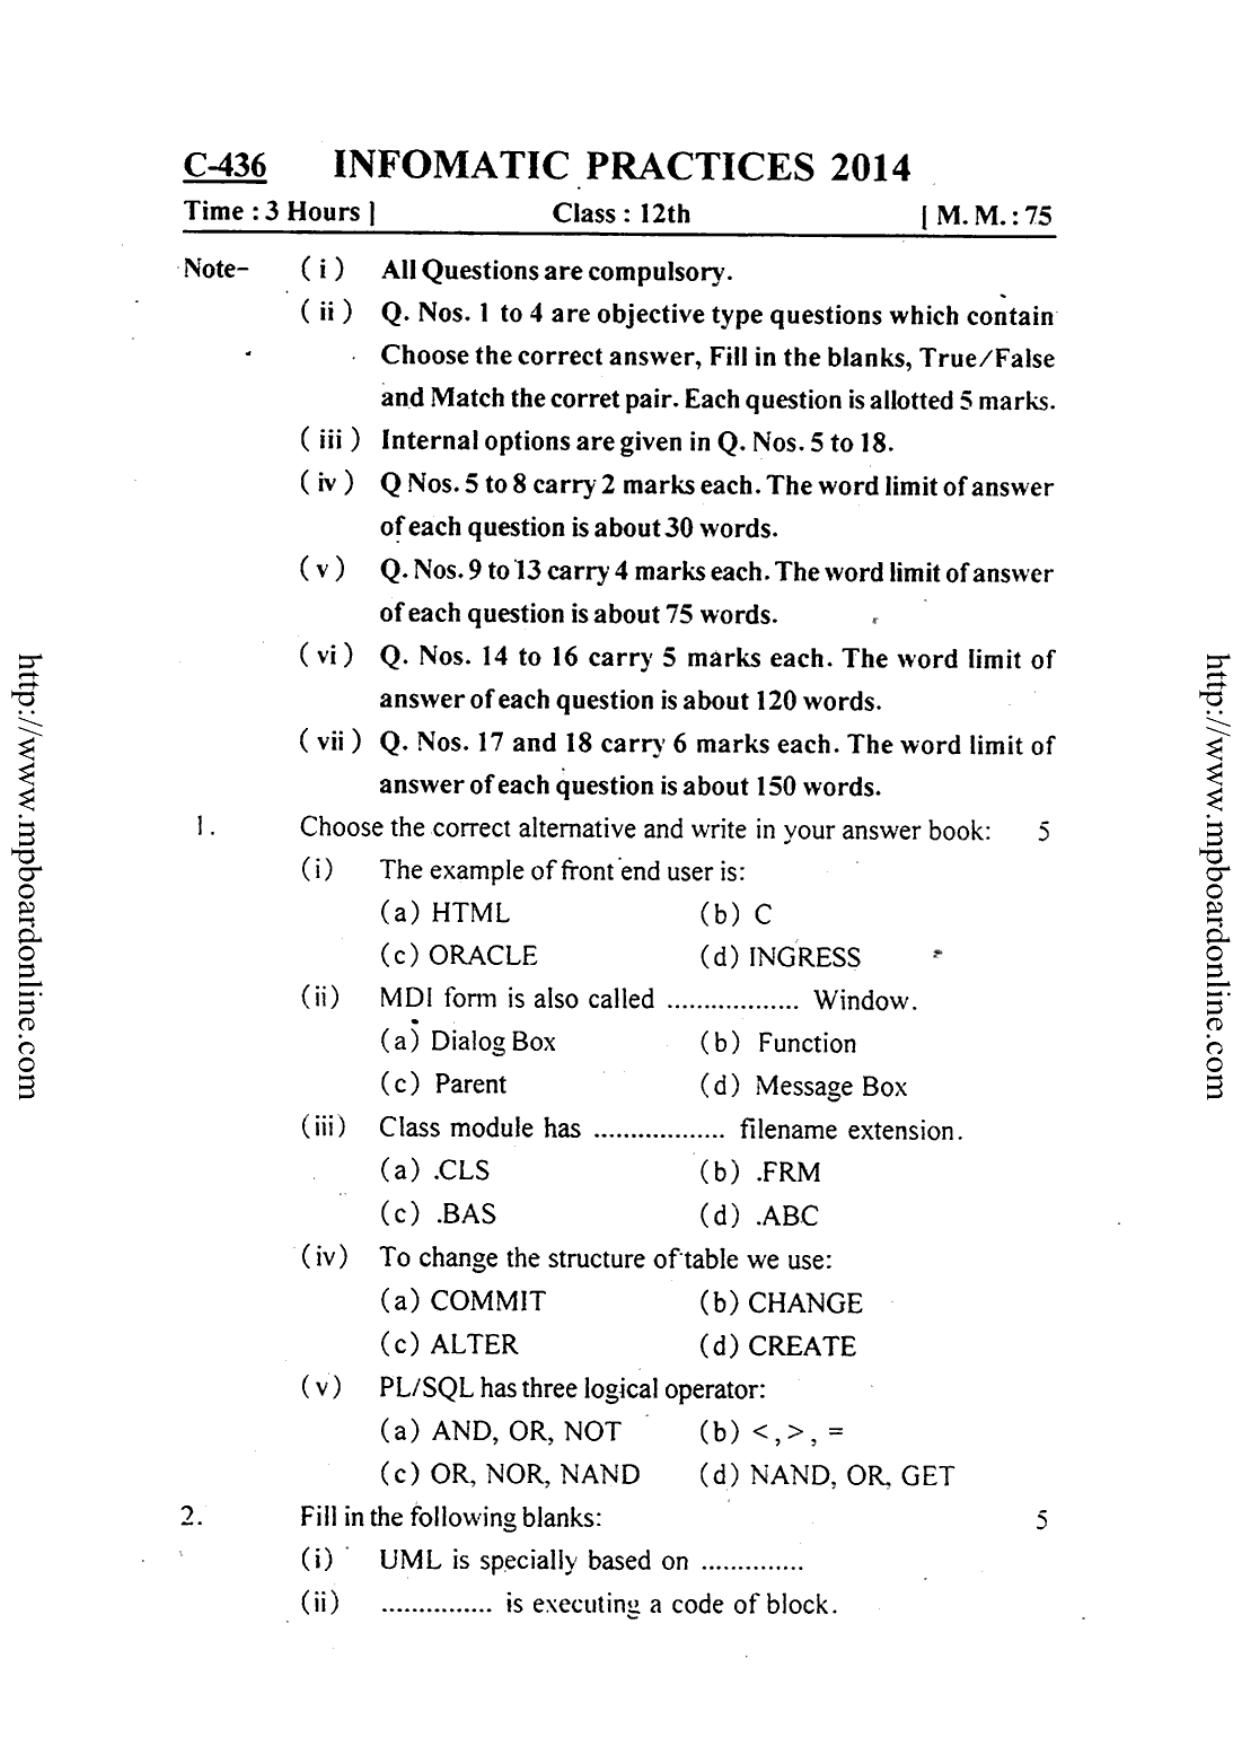 MP Board Class 12 Informatics Practices (English Medium) 2014 Question Paper - Page 1